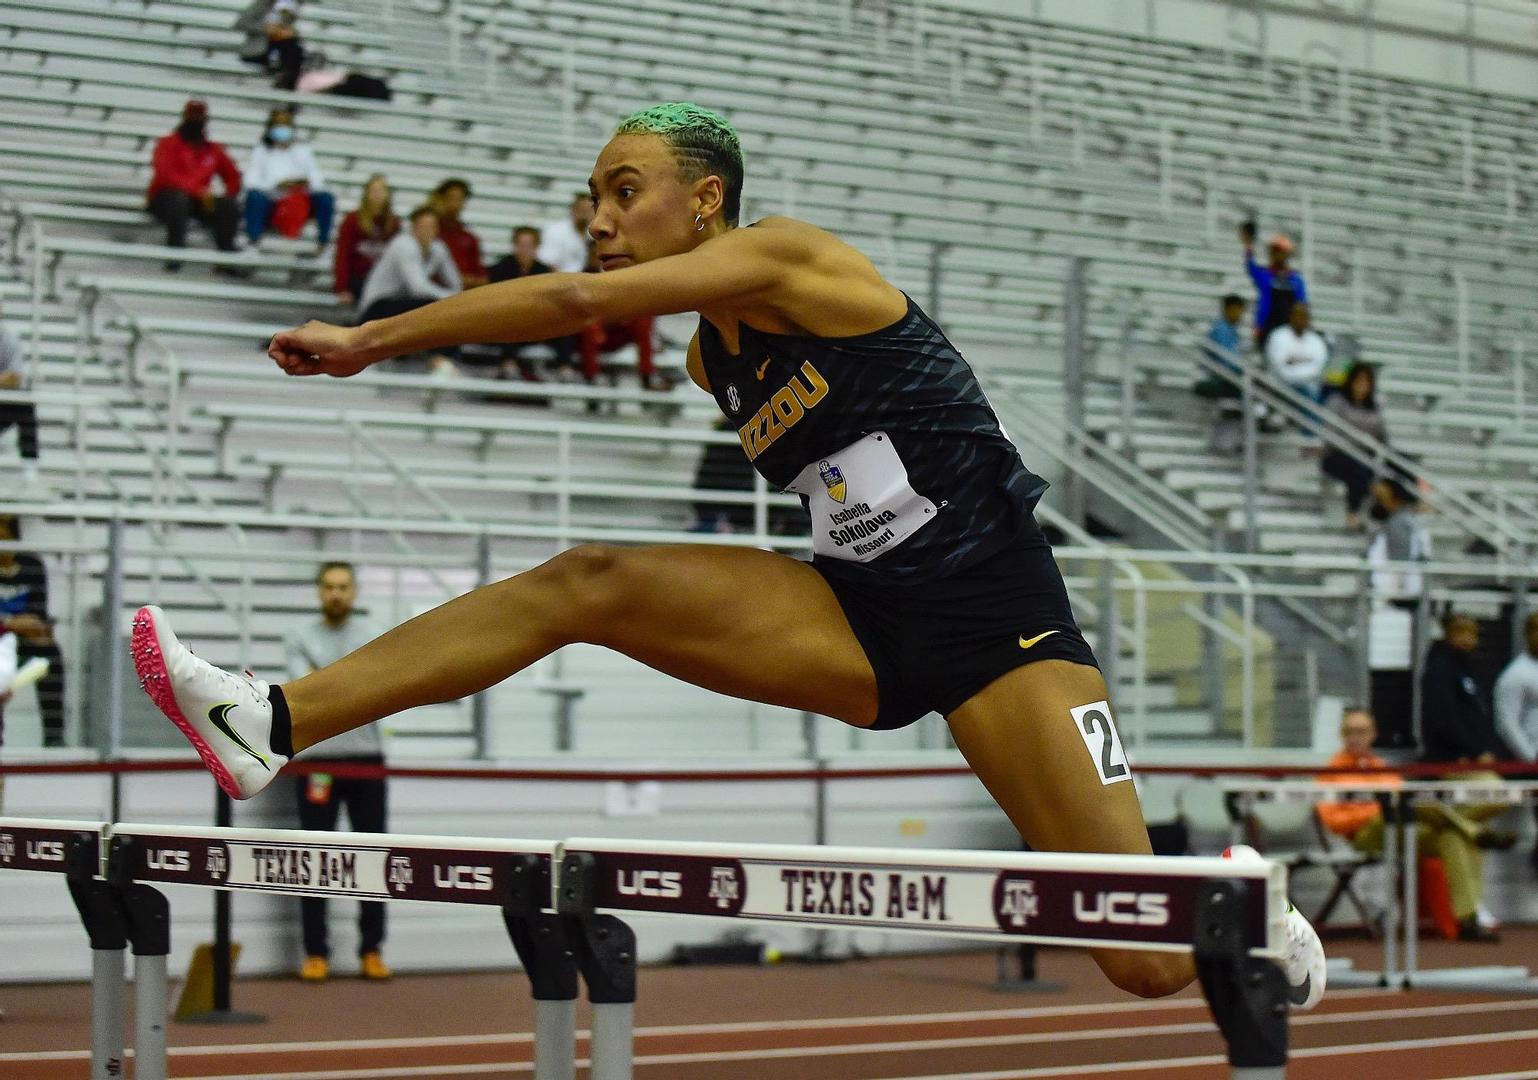 Isabella Sokolova
Mizzou Tigers at SEC Indoor Championships in College Station, TX. on Friday, February 25, 2022. 
(Photo by Jeff Curry)